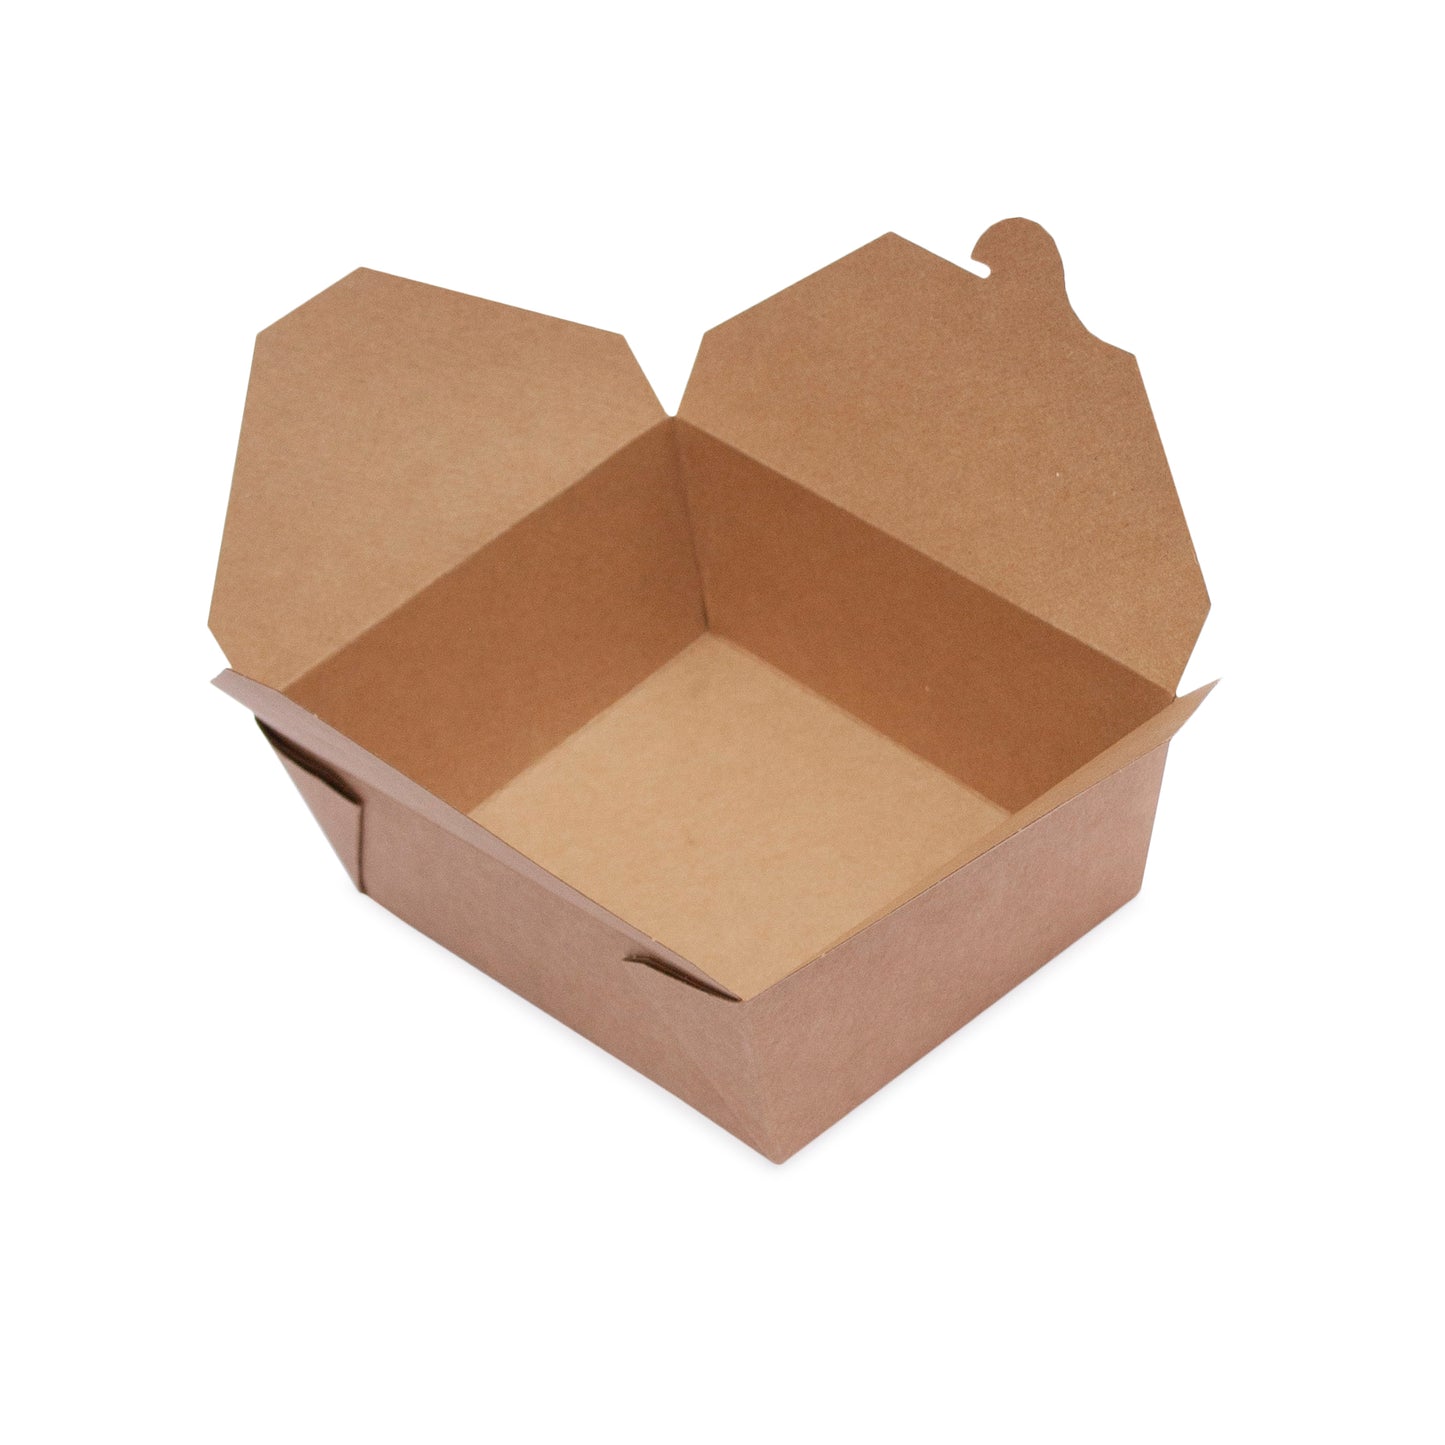 Leakproof food container No.8 kraft food-to-go carton 300 units, 1300ml (15 x 12 x 6.5cm)